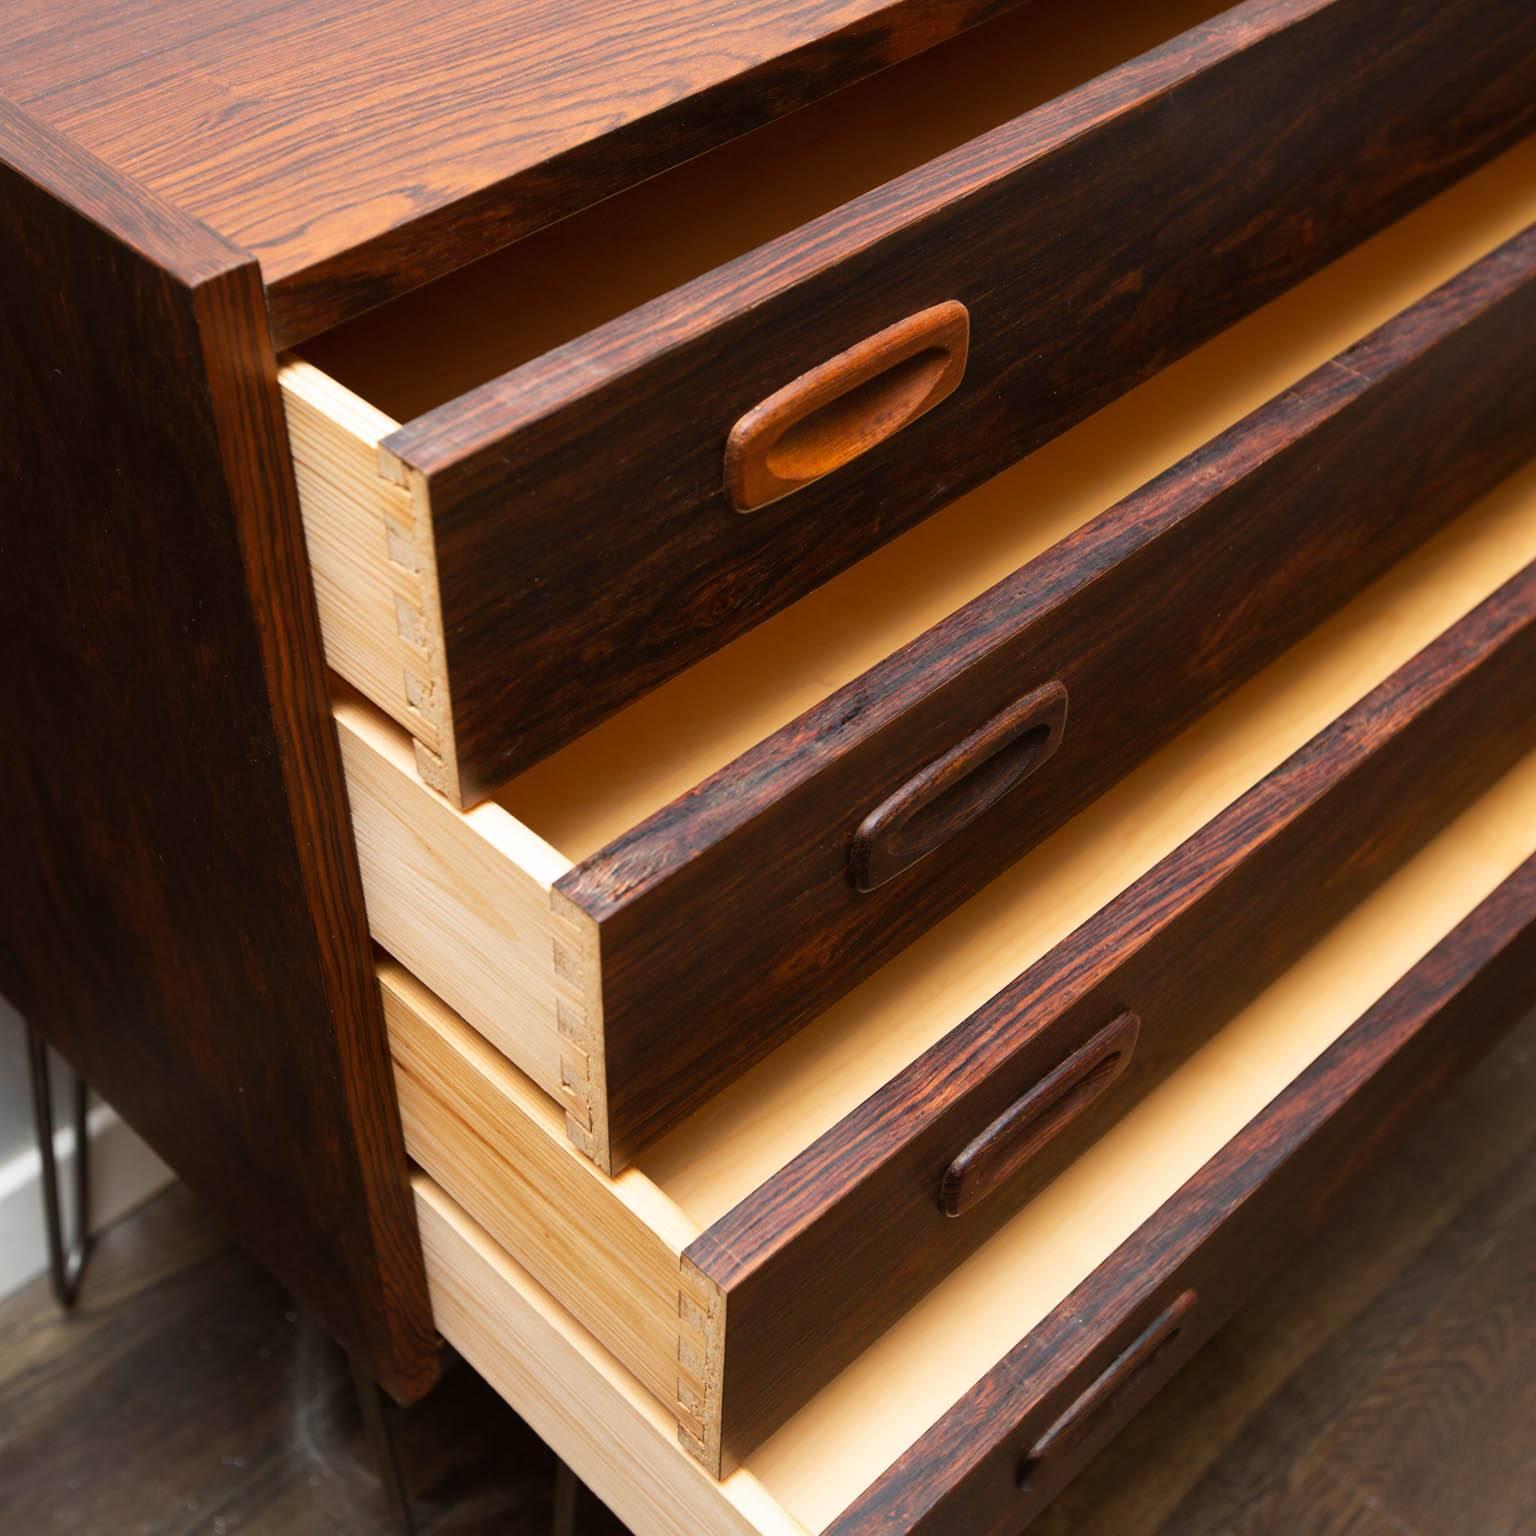 A nicely dovetail constructed four-drawer piece that's been updated with sturdy hairpin legs.